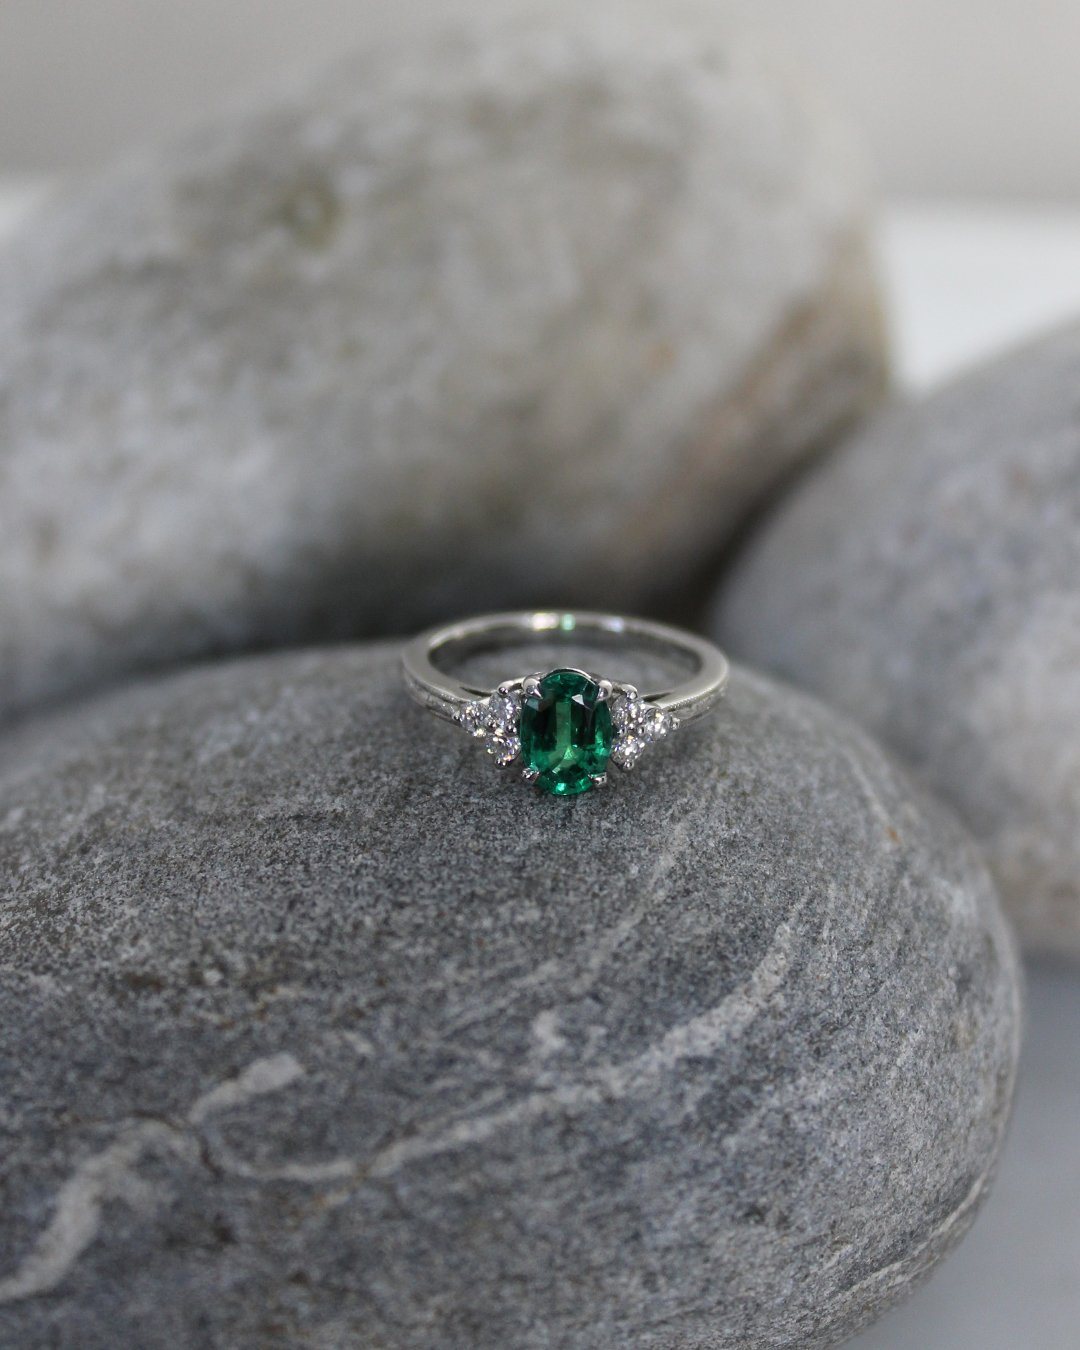 A Colombian emerald engagement ring